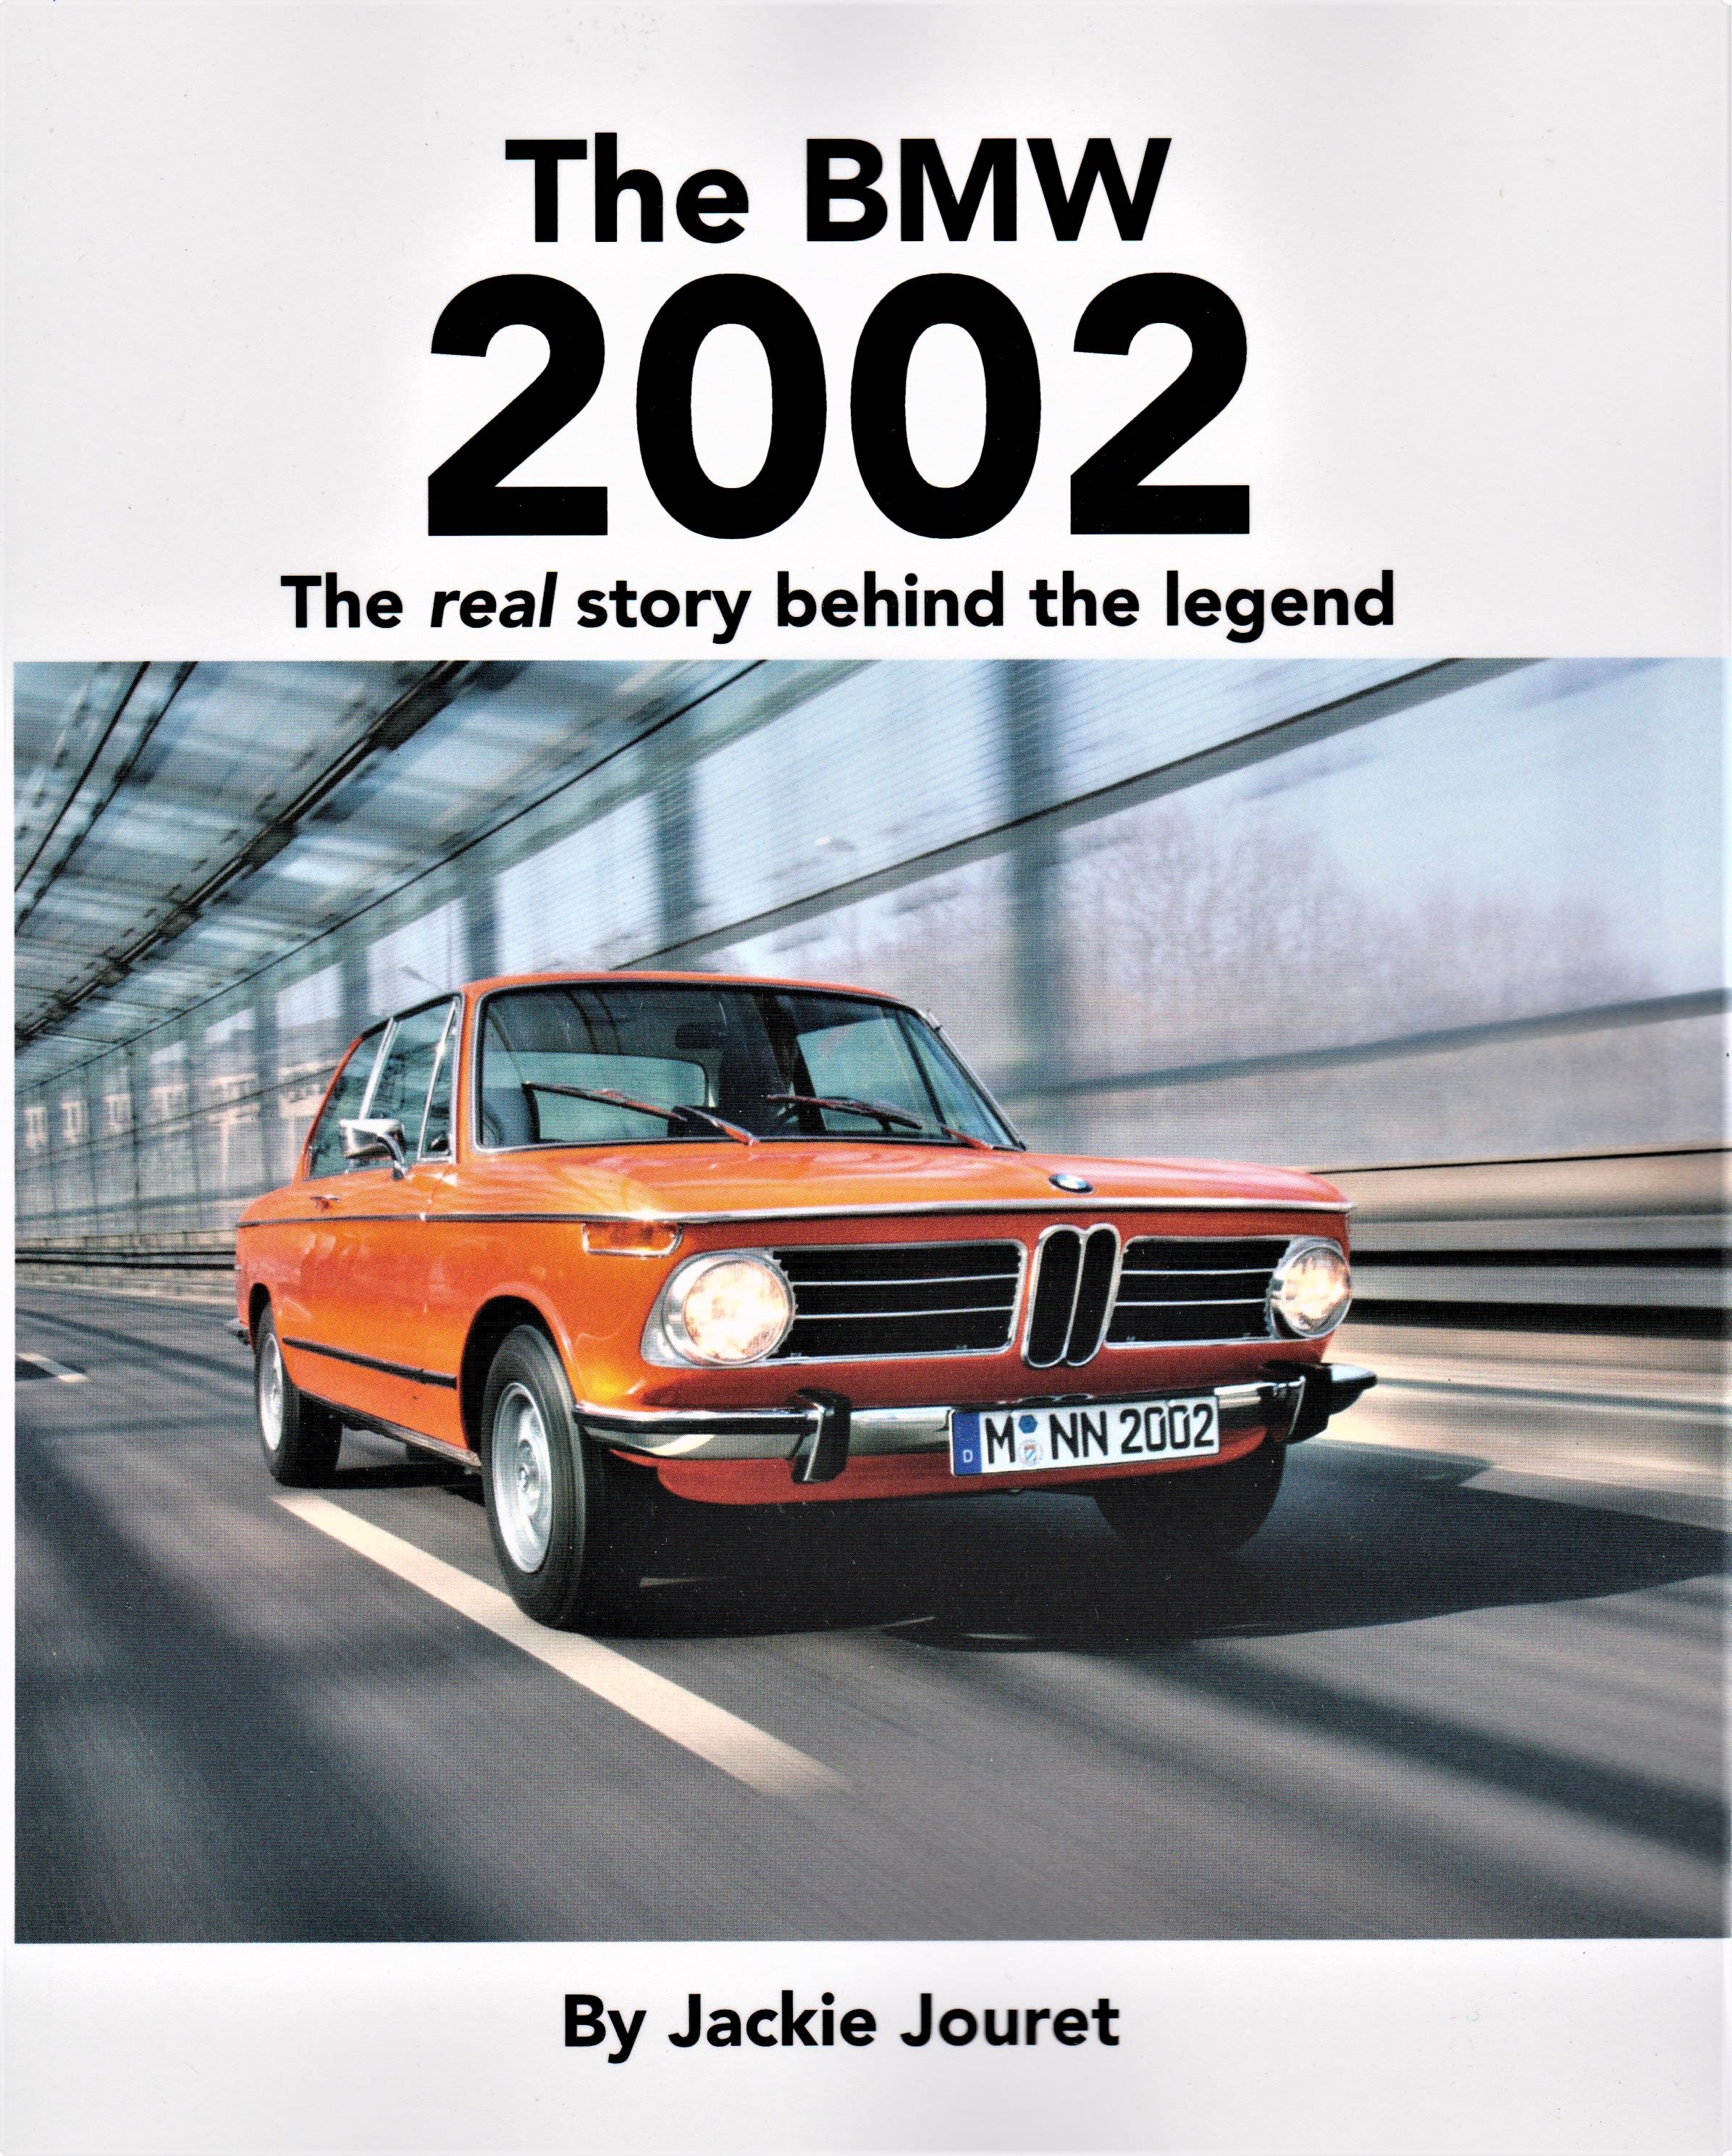 BMW: The Story behind the Brand. Before learning about the